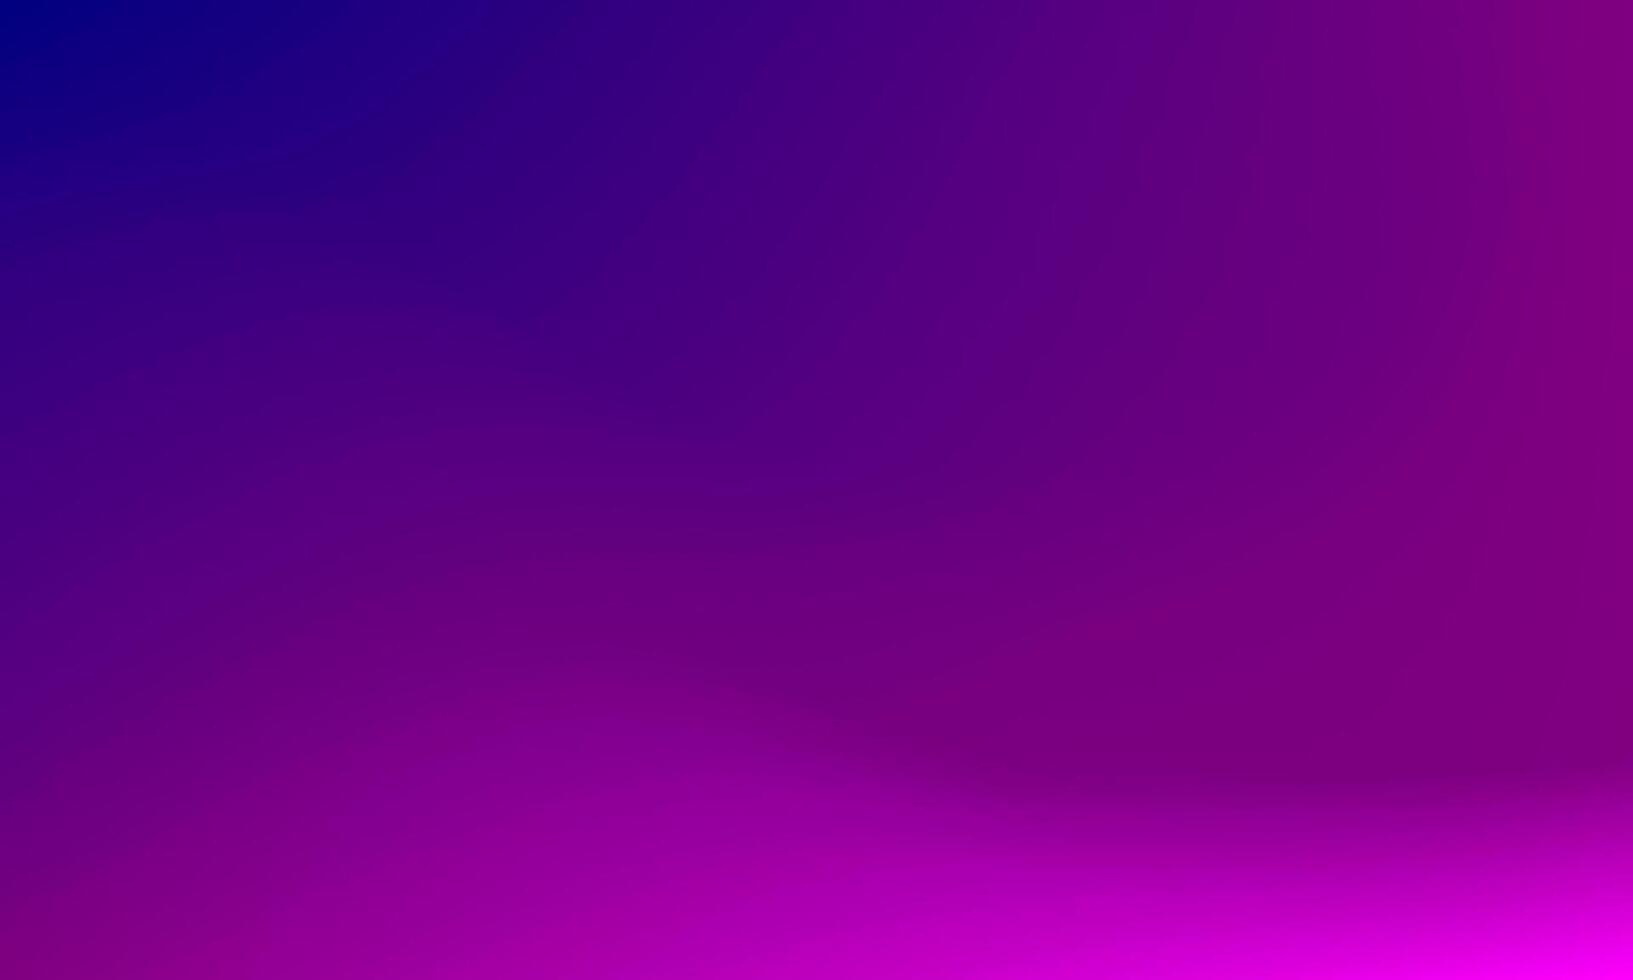 Dark violet mesh gradient backgrounds with soft color. For covers, wallpapers, brands, social media and more. vector